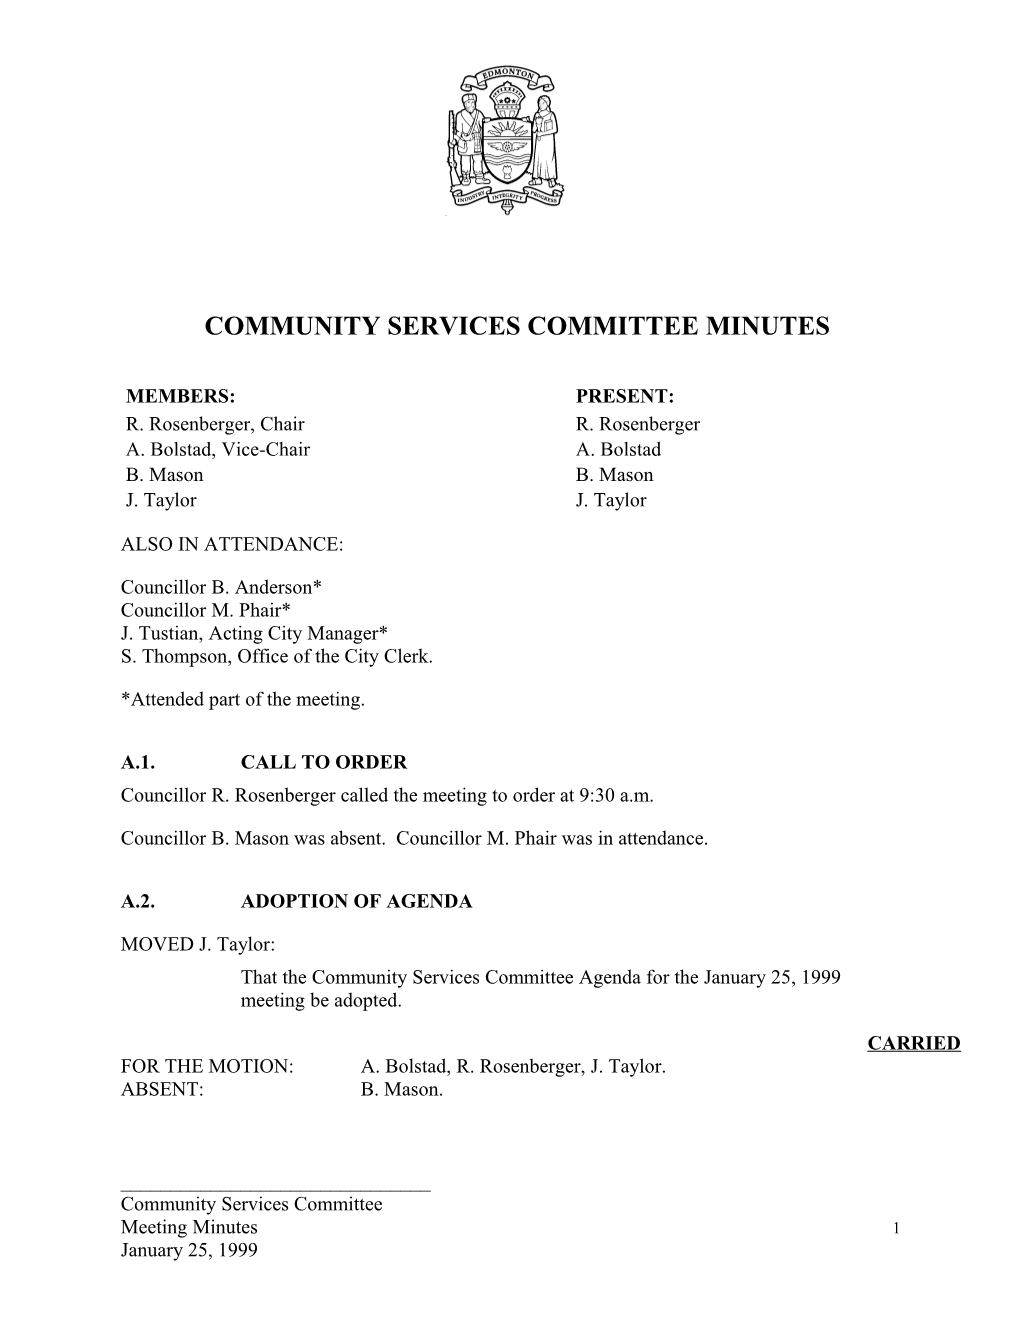 Minutes for Community Services Committee January 25, 1999 Meeting